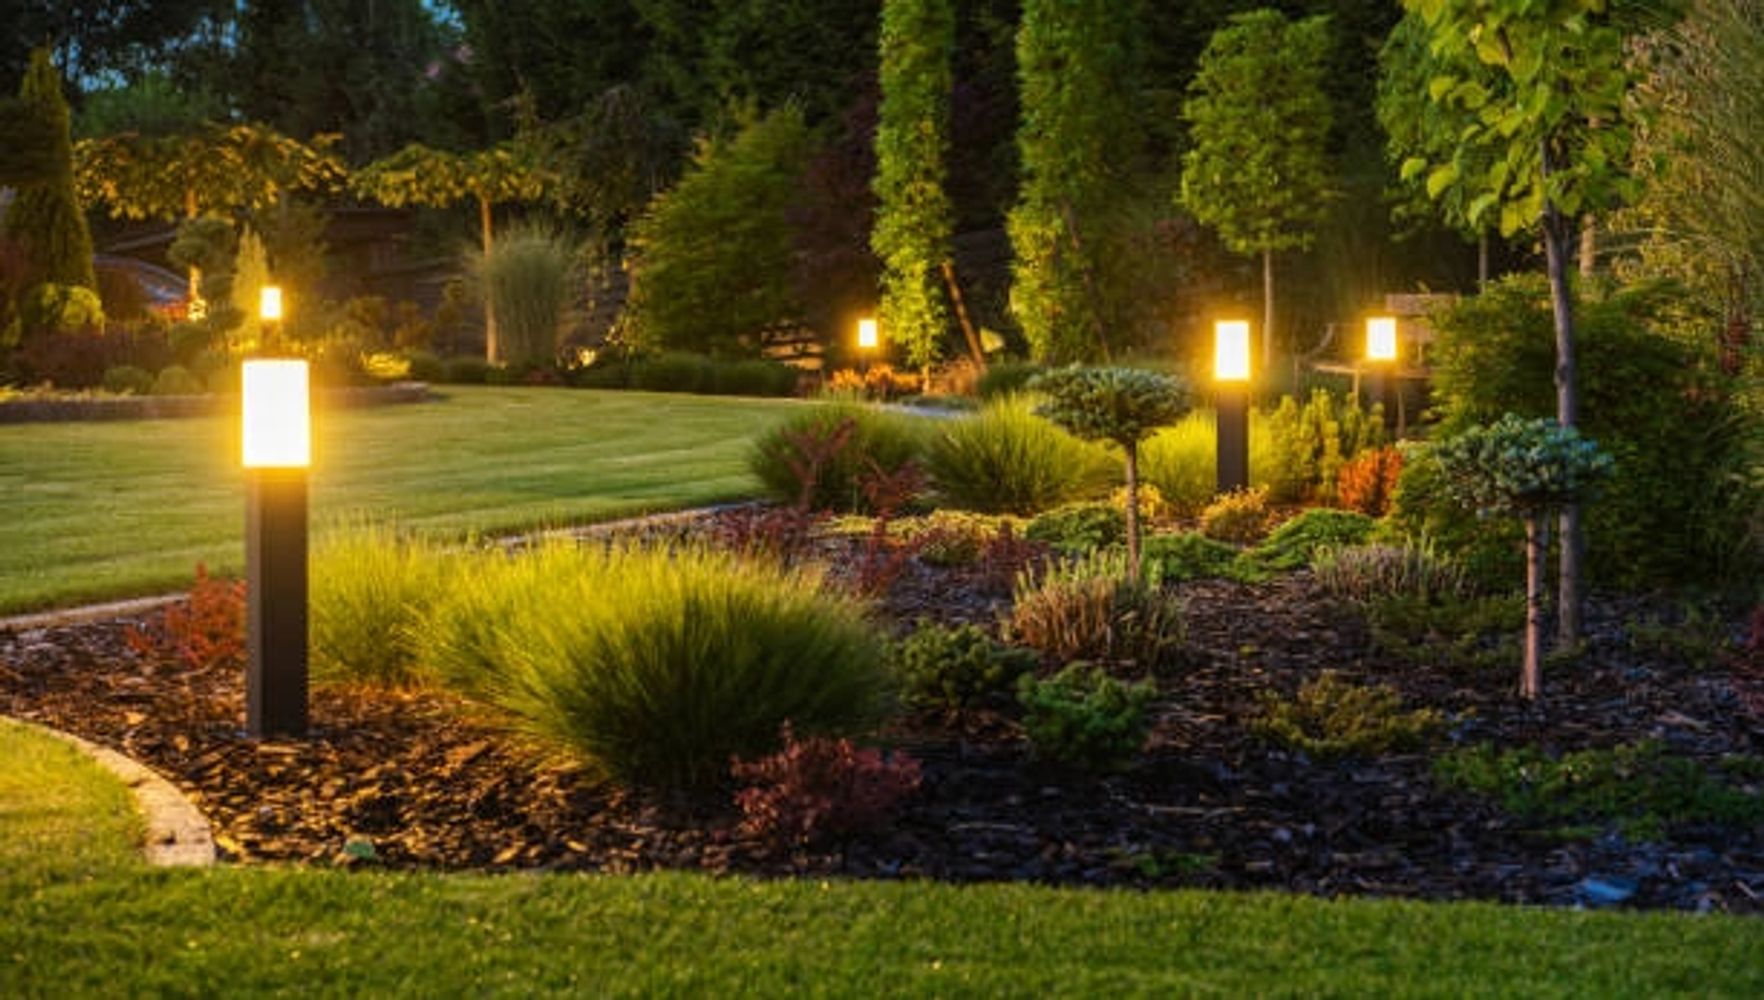 Landscaping, Hardscaping, Patio, Lawn care, tree trimming, bin rental, Oakville, Newmarket, Aurora